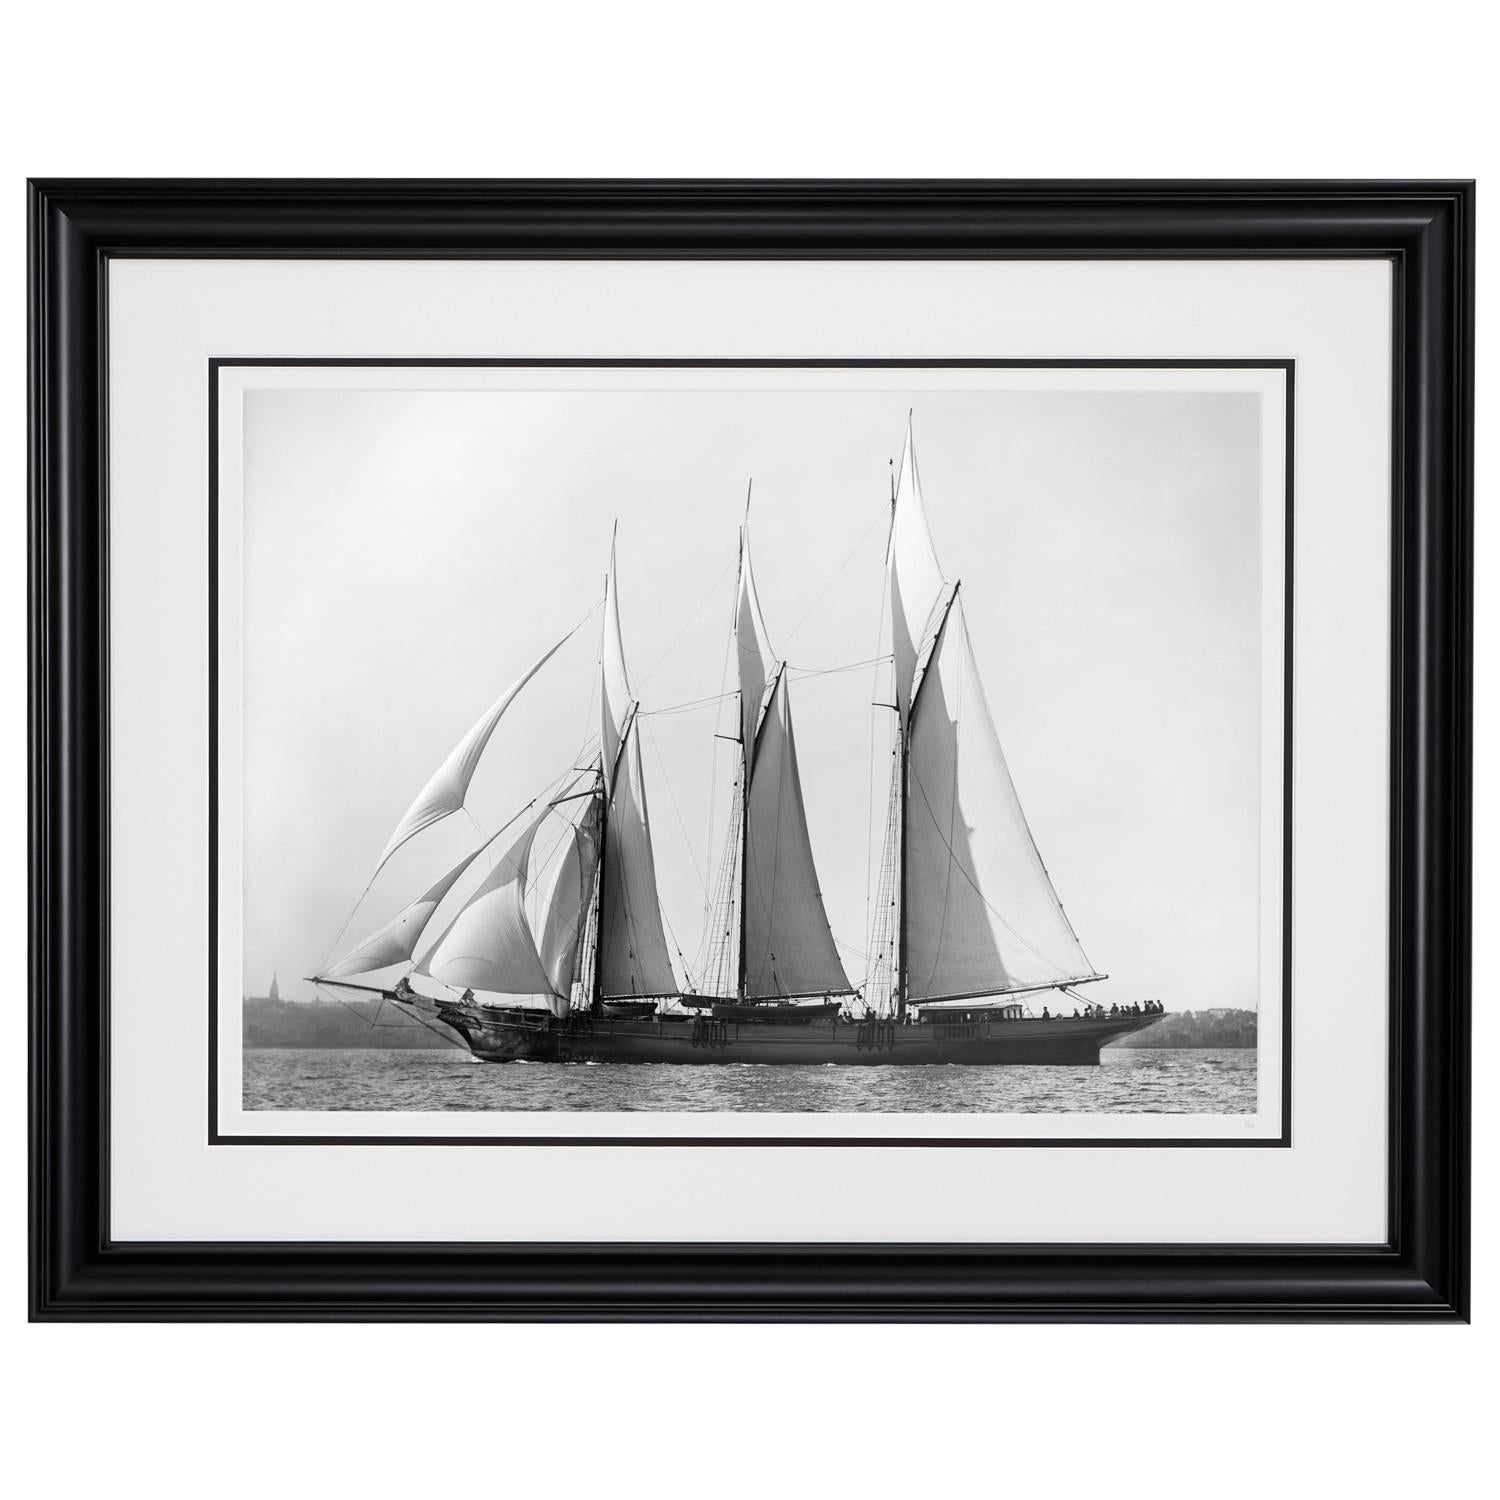 Sailing Yacht Chazalie, 1883  - Photograph by Alfred John West